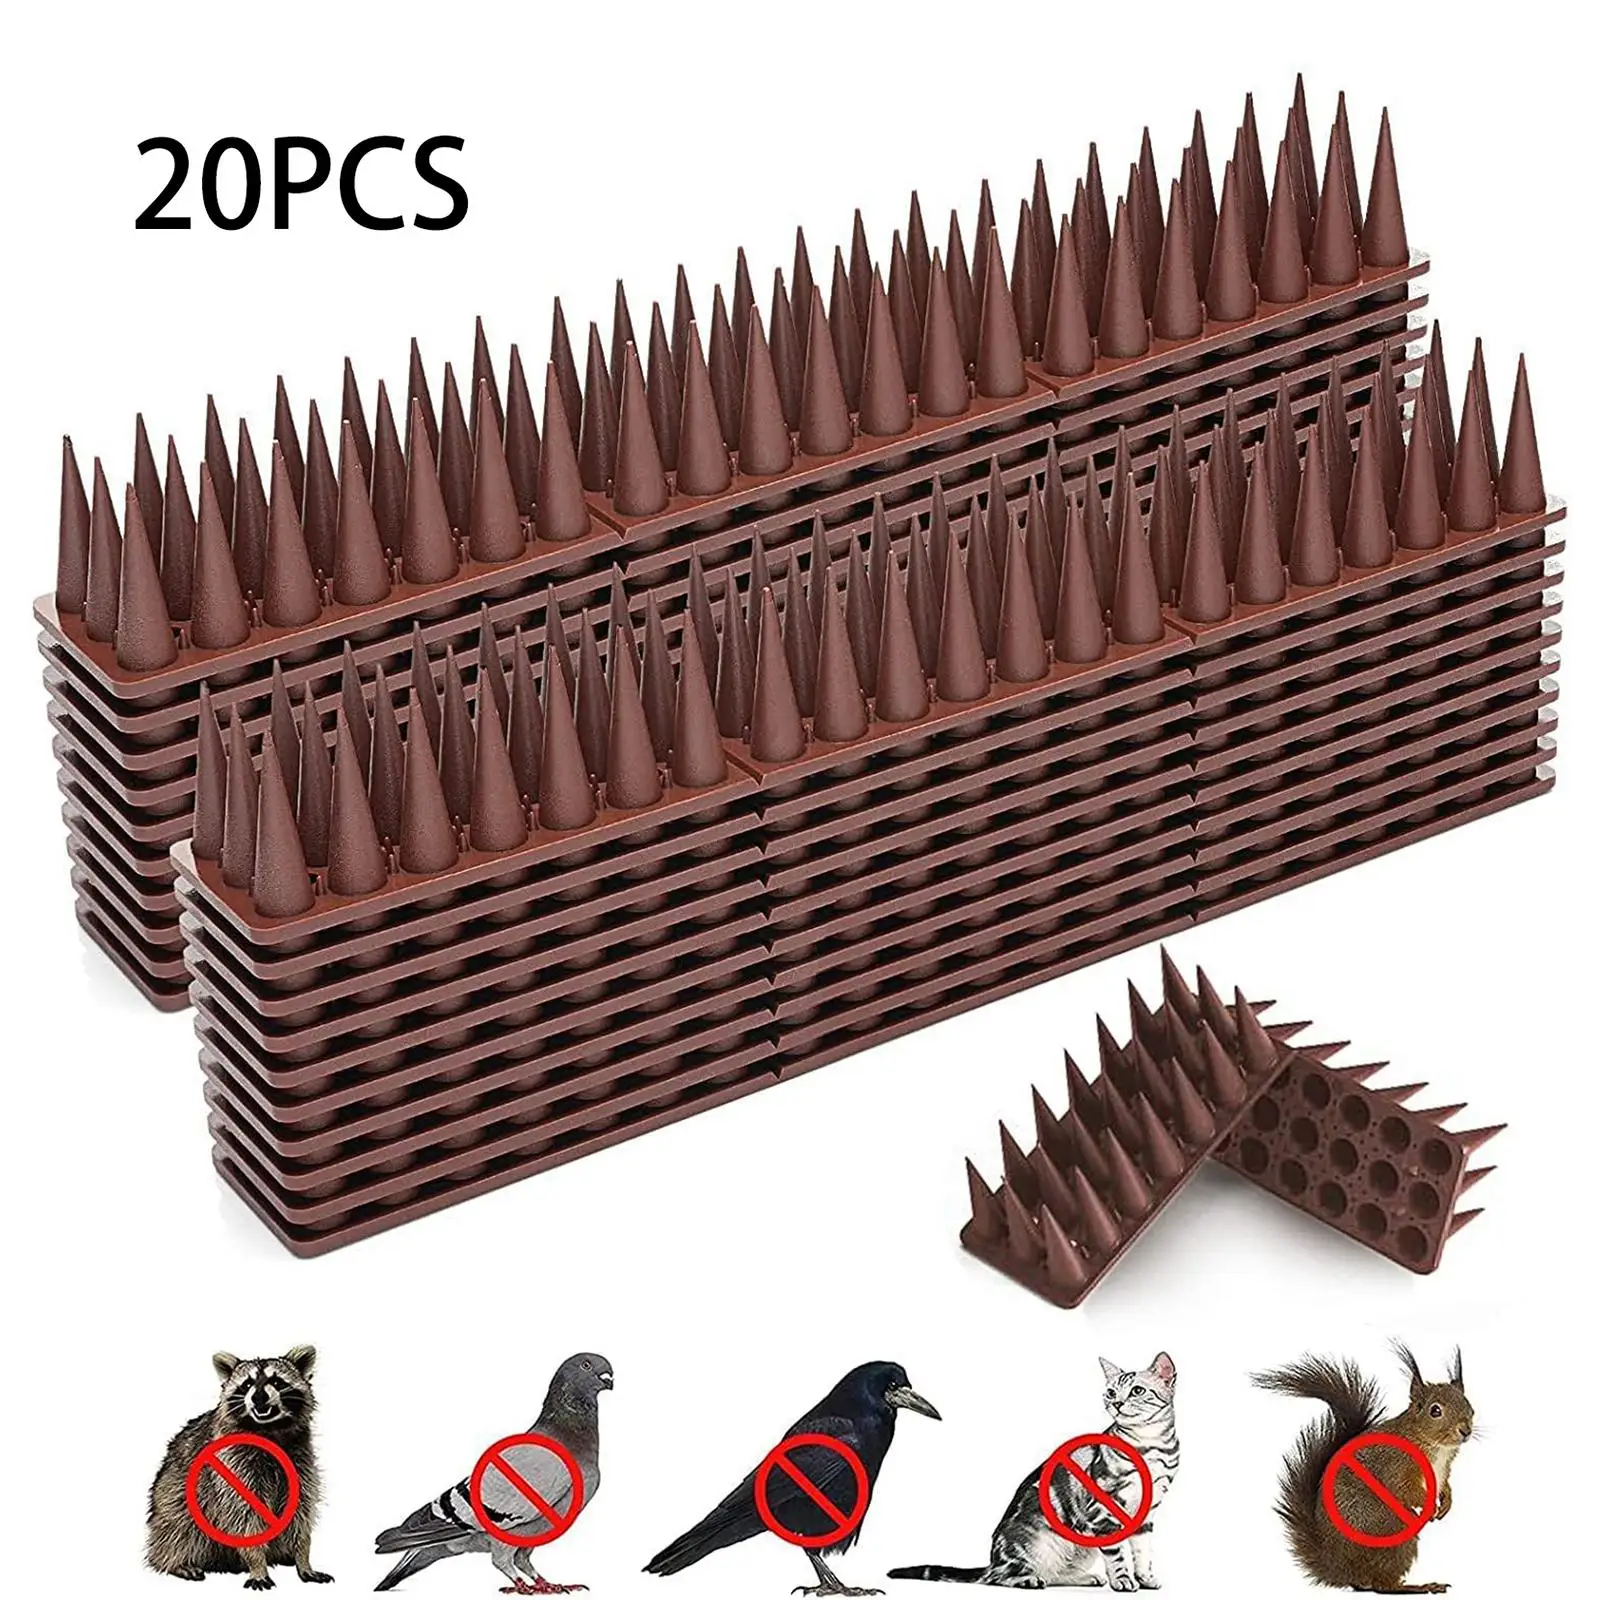 20Pcs Birdproof Spikes Anti Climb Outside to Keep Birds Away Bird Deterrent Spikes for Crow Seagull Cats Squirrel Raccoon